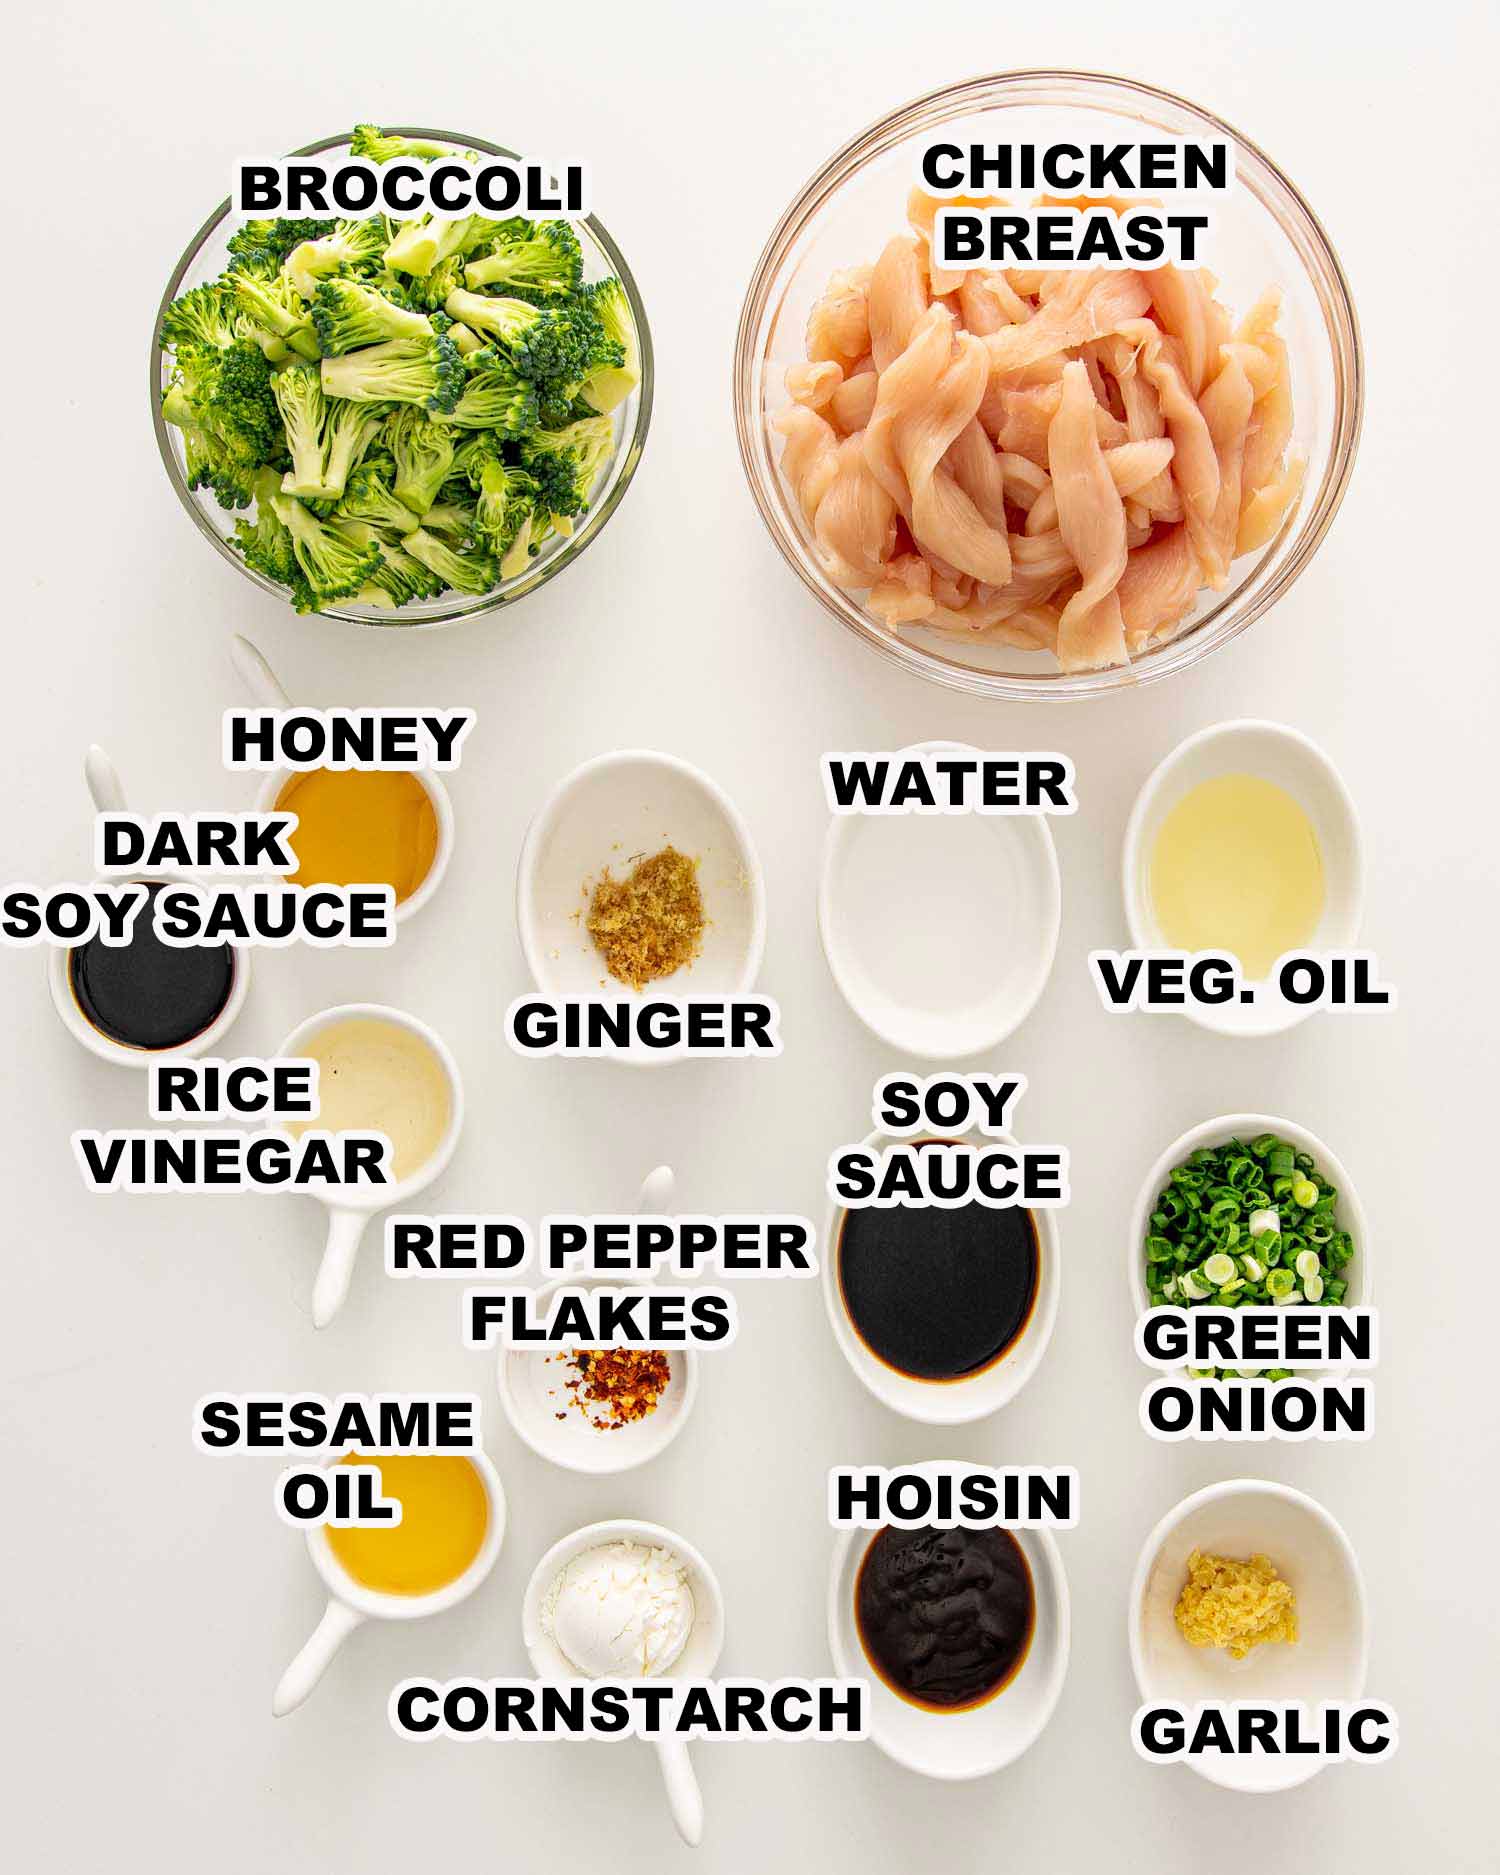 ingredients needed to make asian style chicken and broccoli.